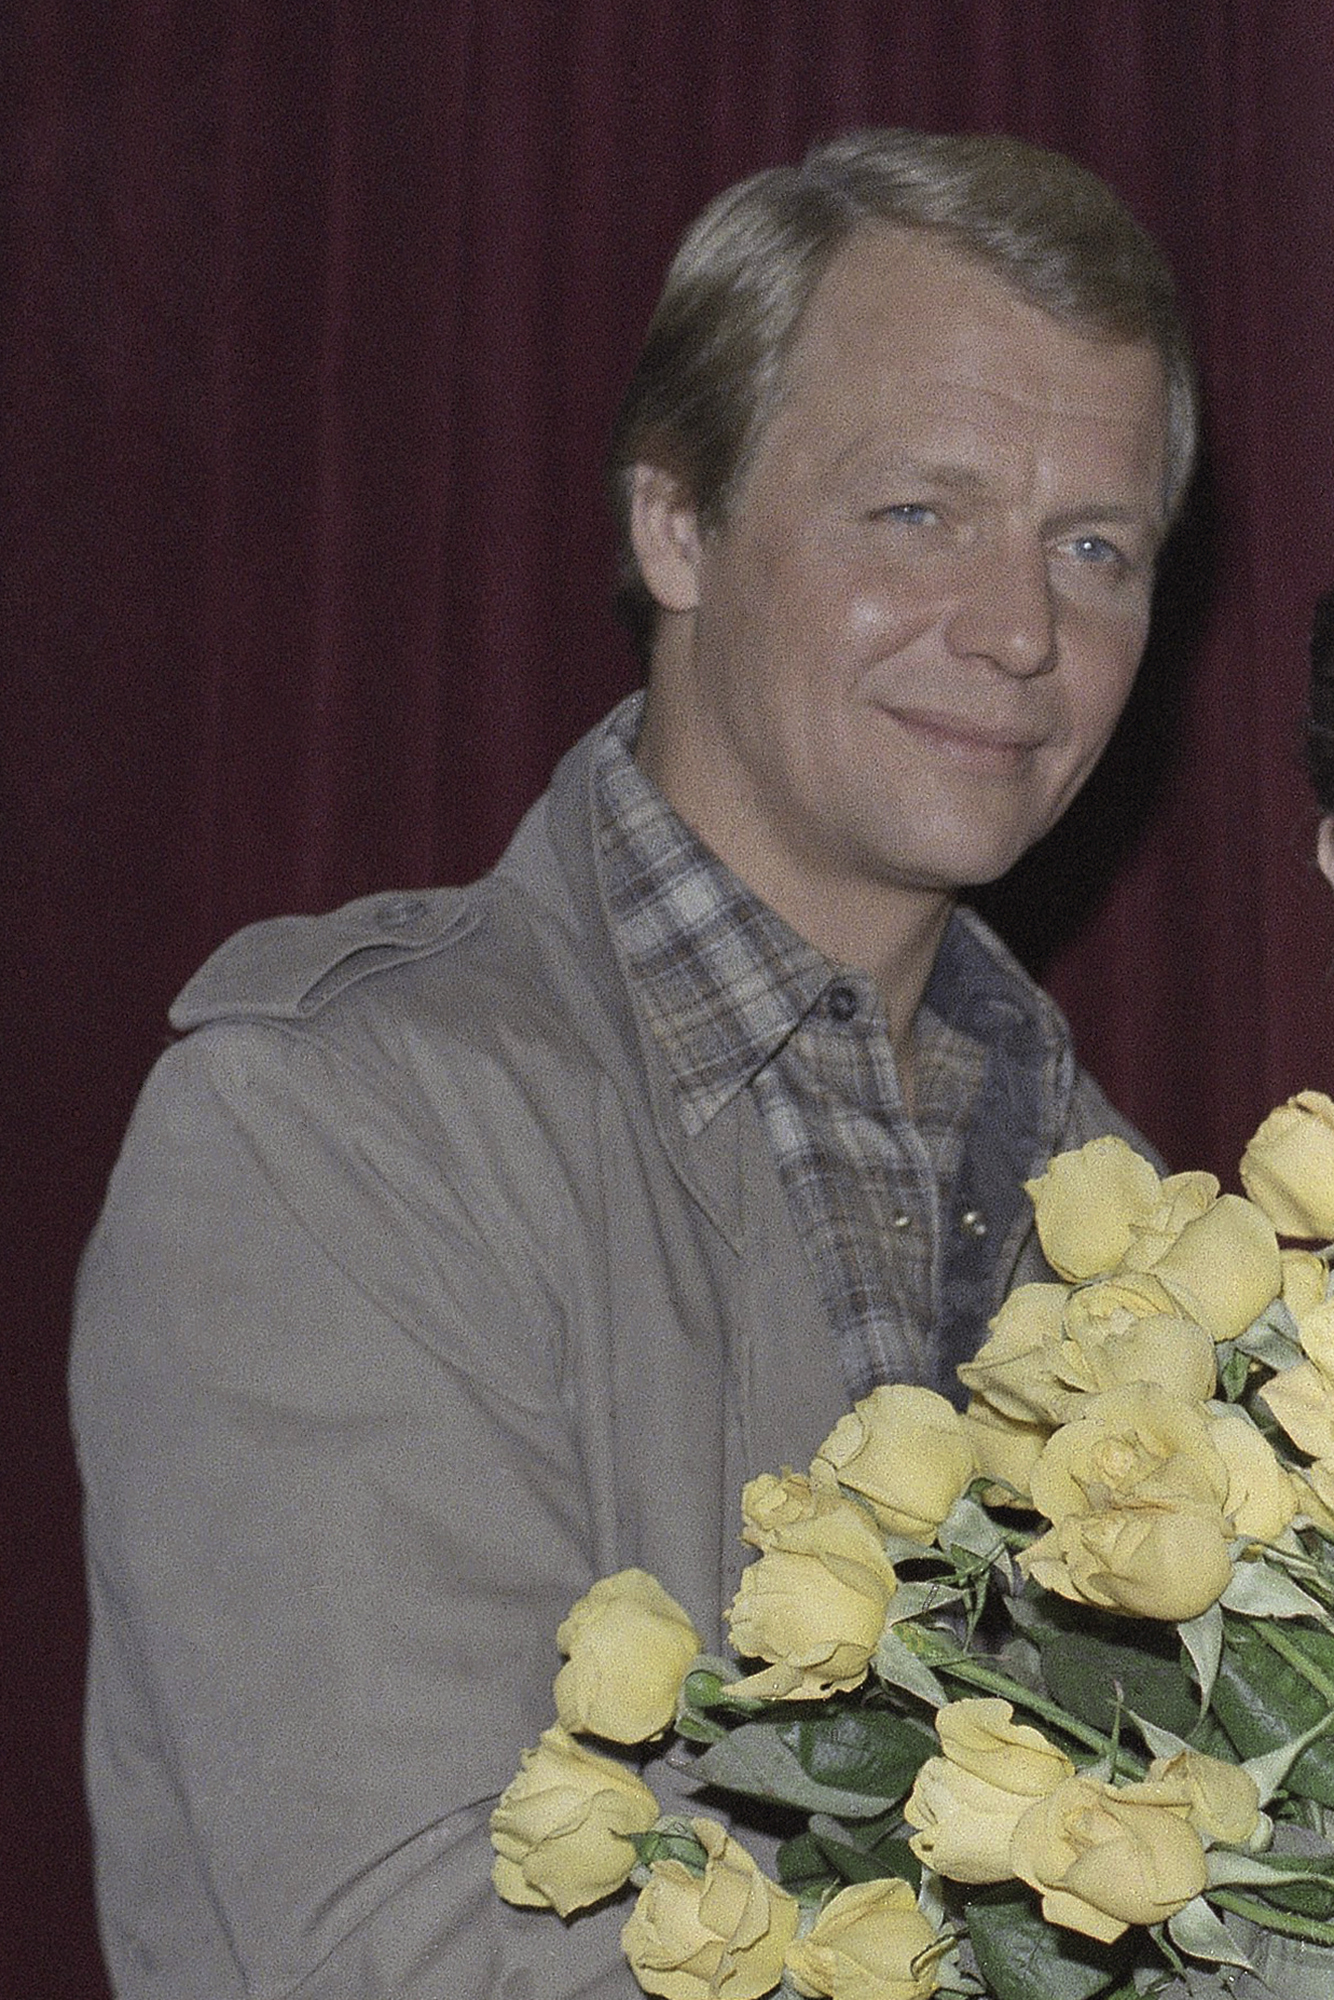 FILE- David Soul is photographed at an event in Los Angeles, Dec. 6, 1983. Soul, who hit fame as blond half of crime-fighting duo “Starsky and Hutch” in a popular 1970s television series, has died. He was 80. Wife Helen Snell, said Friday, Jan. 5, 2024 that Soul died the day before "after a valiant battle for life in the loving company of family.” (AP Photo/Wally Fong, File)